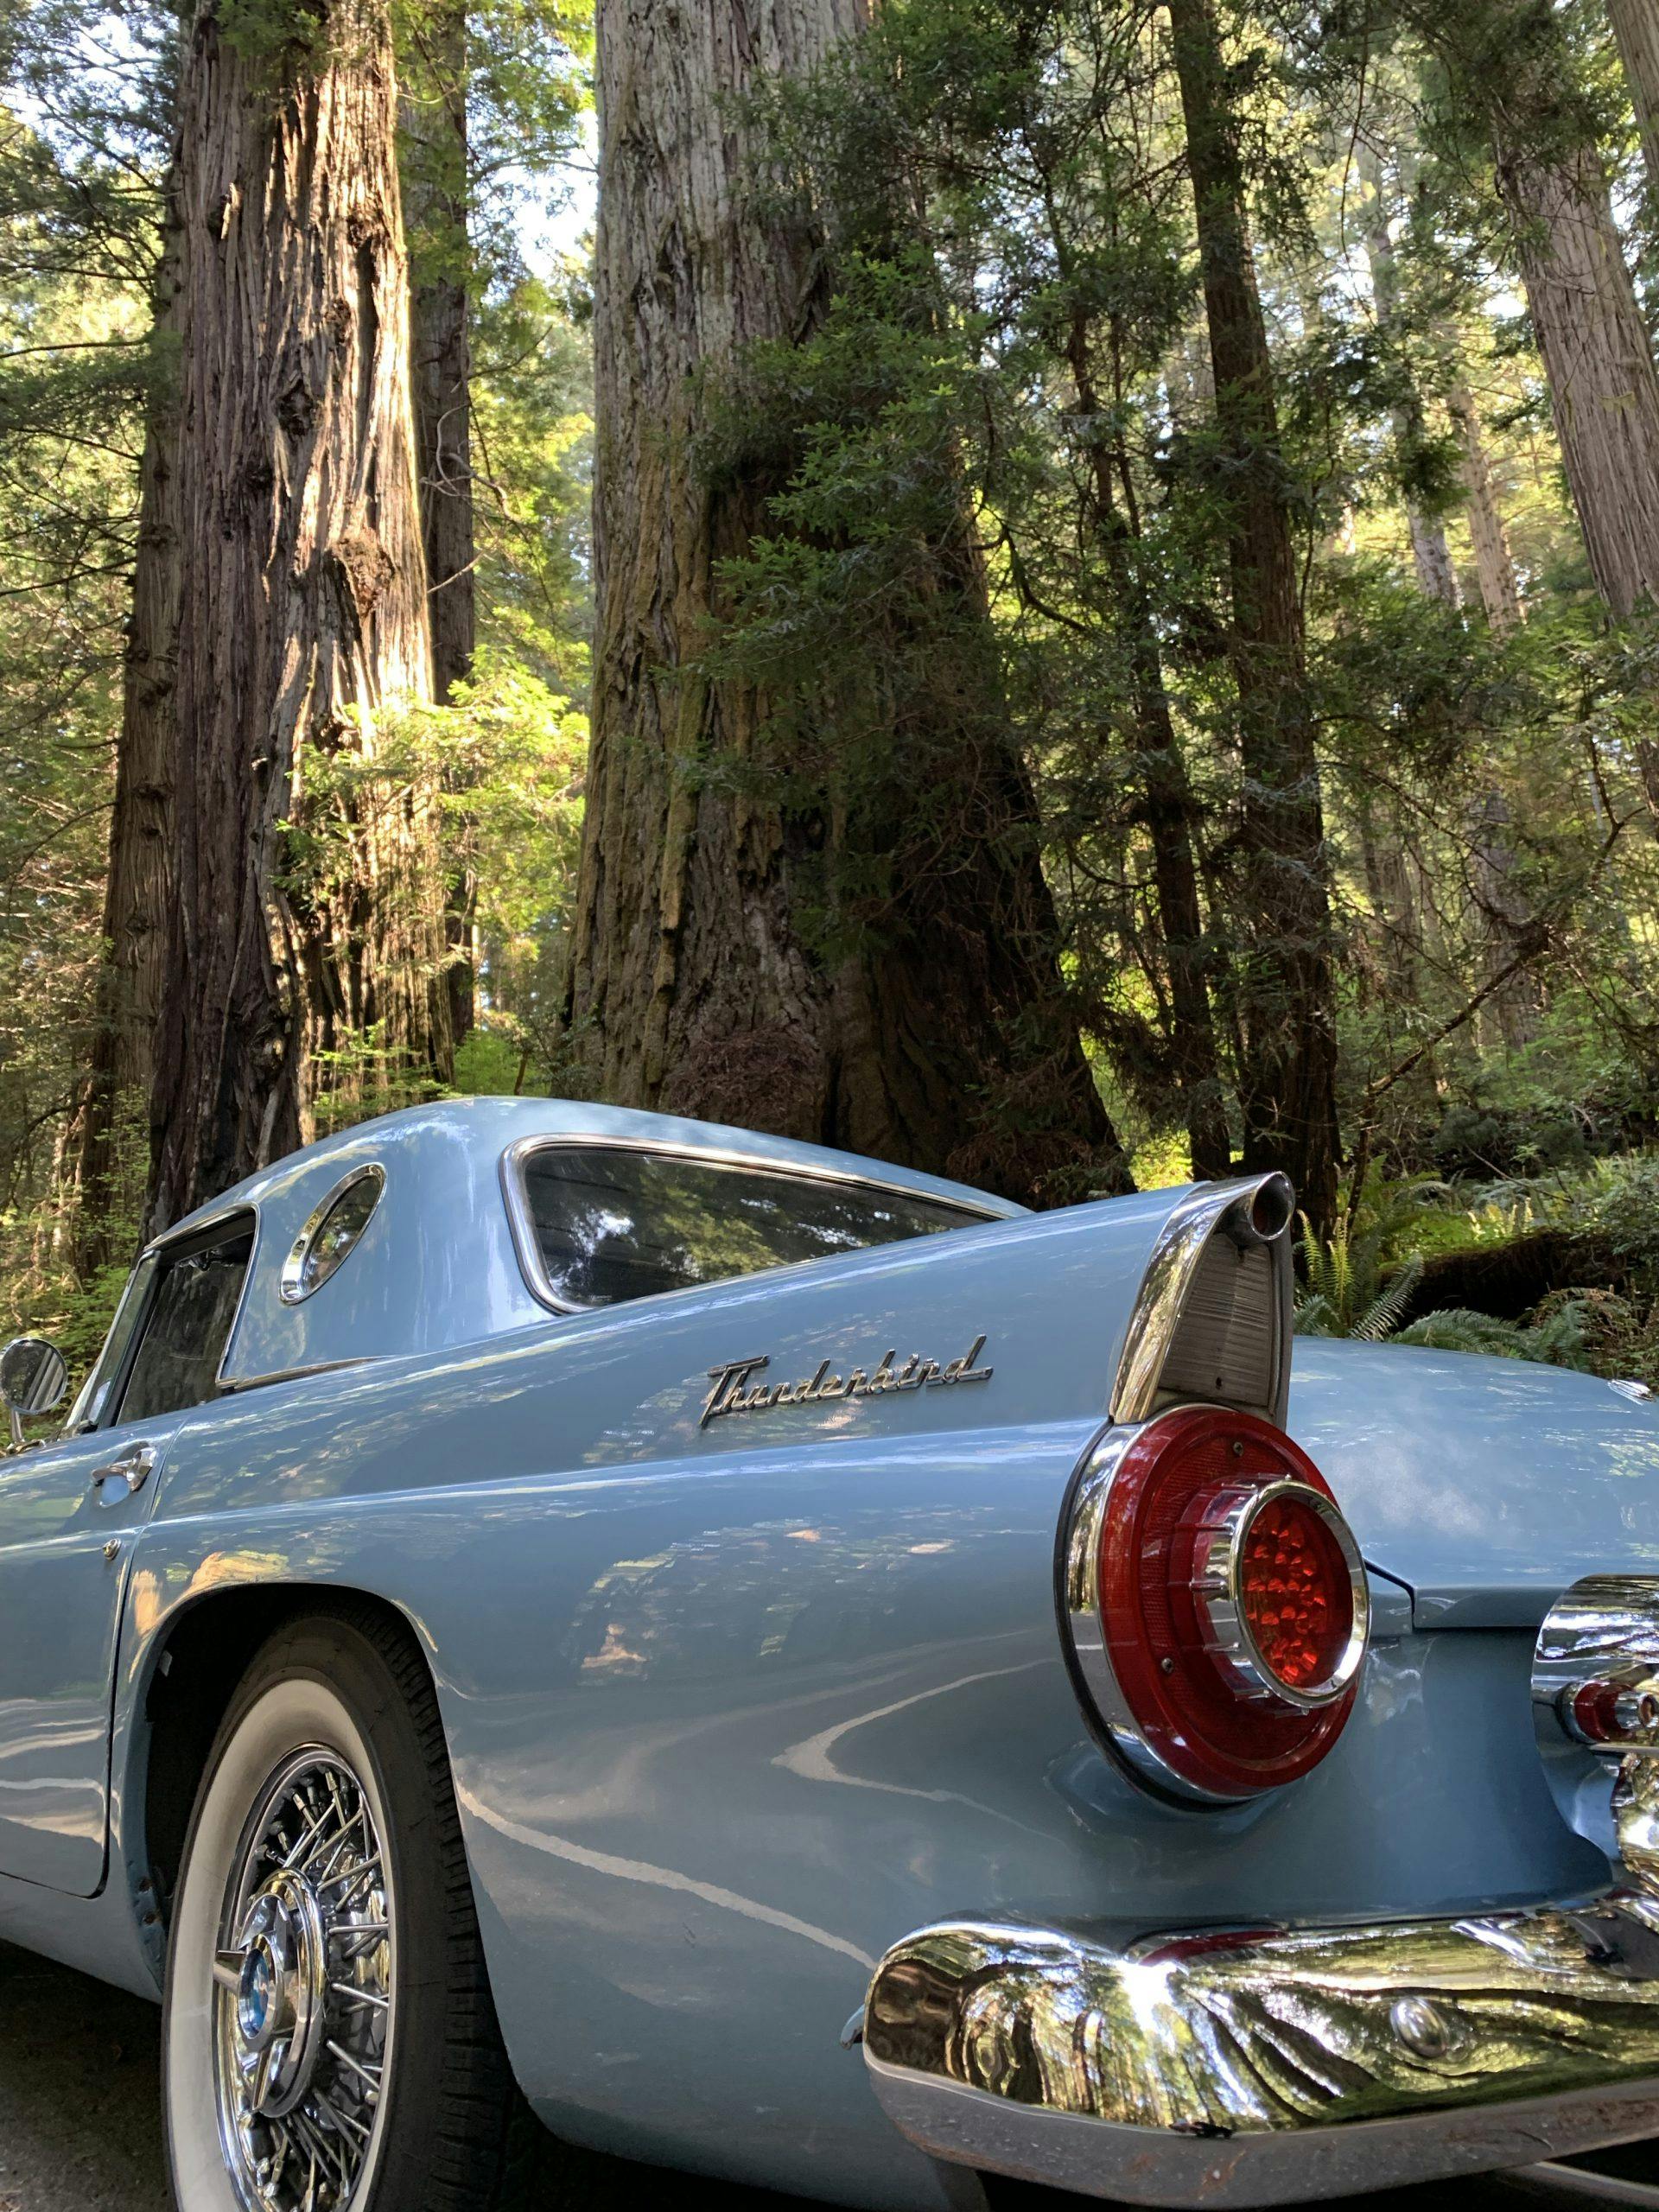 1956 Ford Thunderbird Rear Side By Redwood Trees